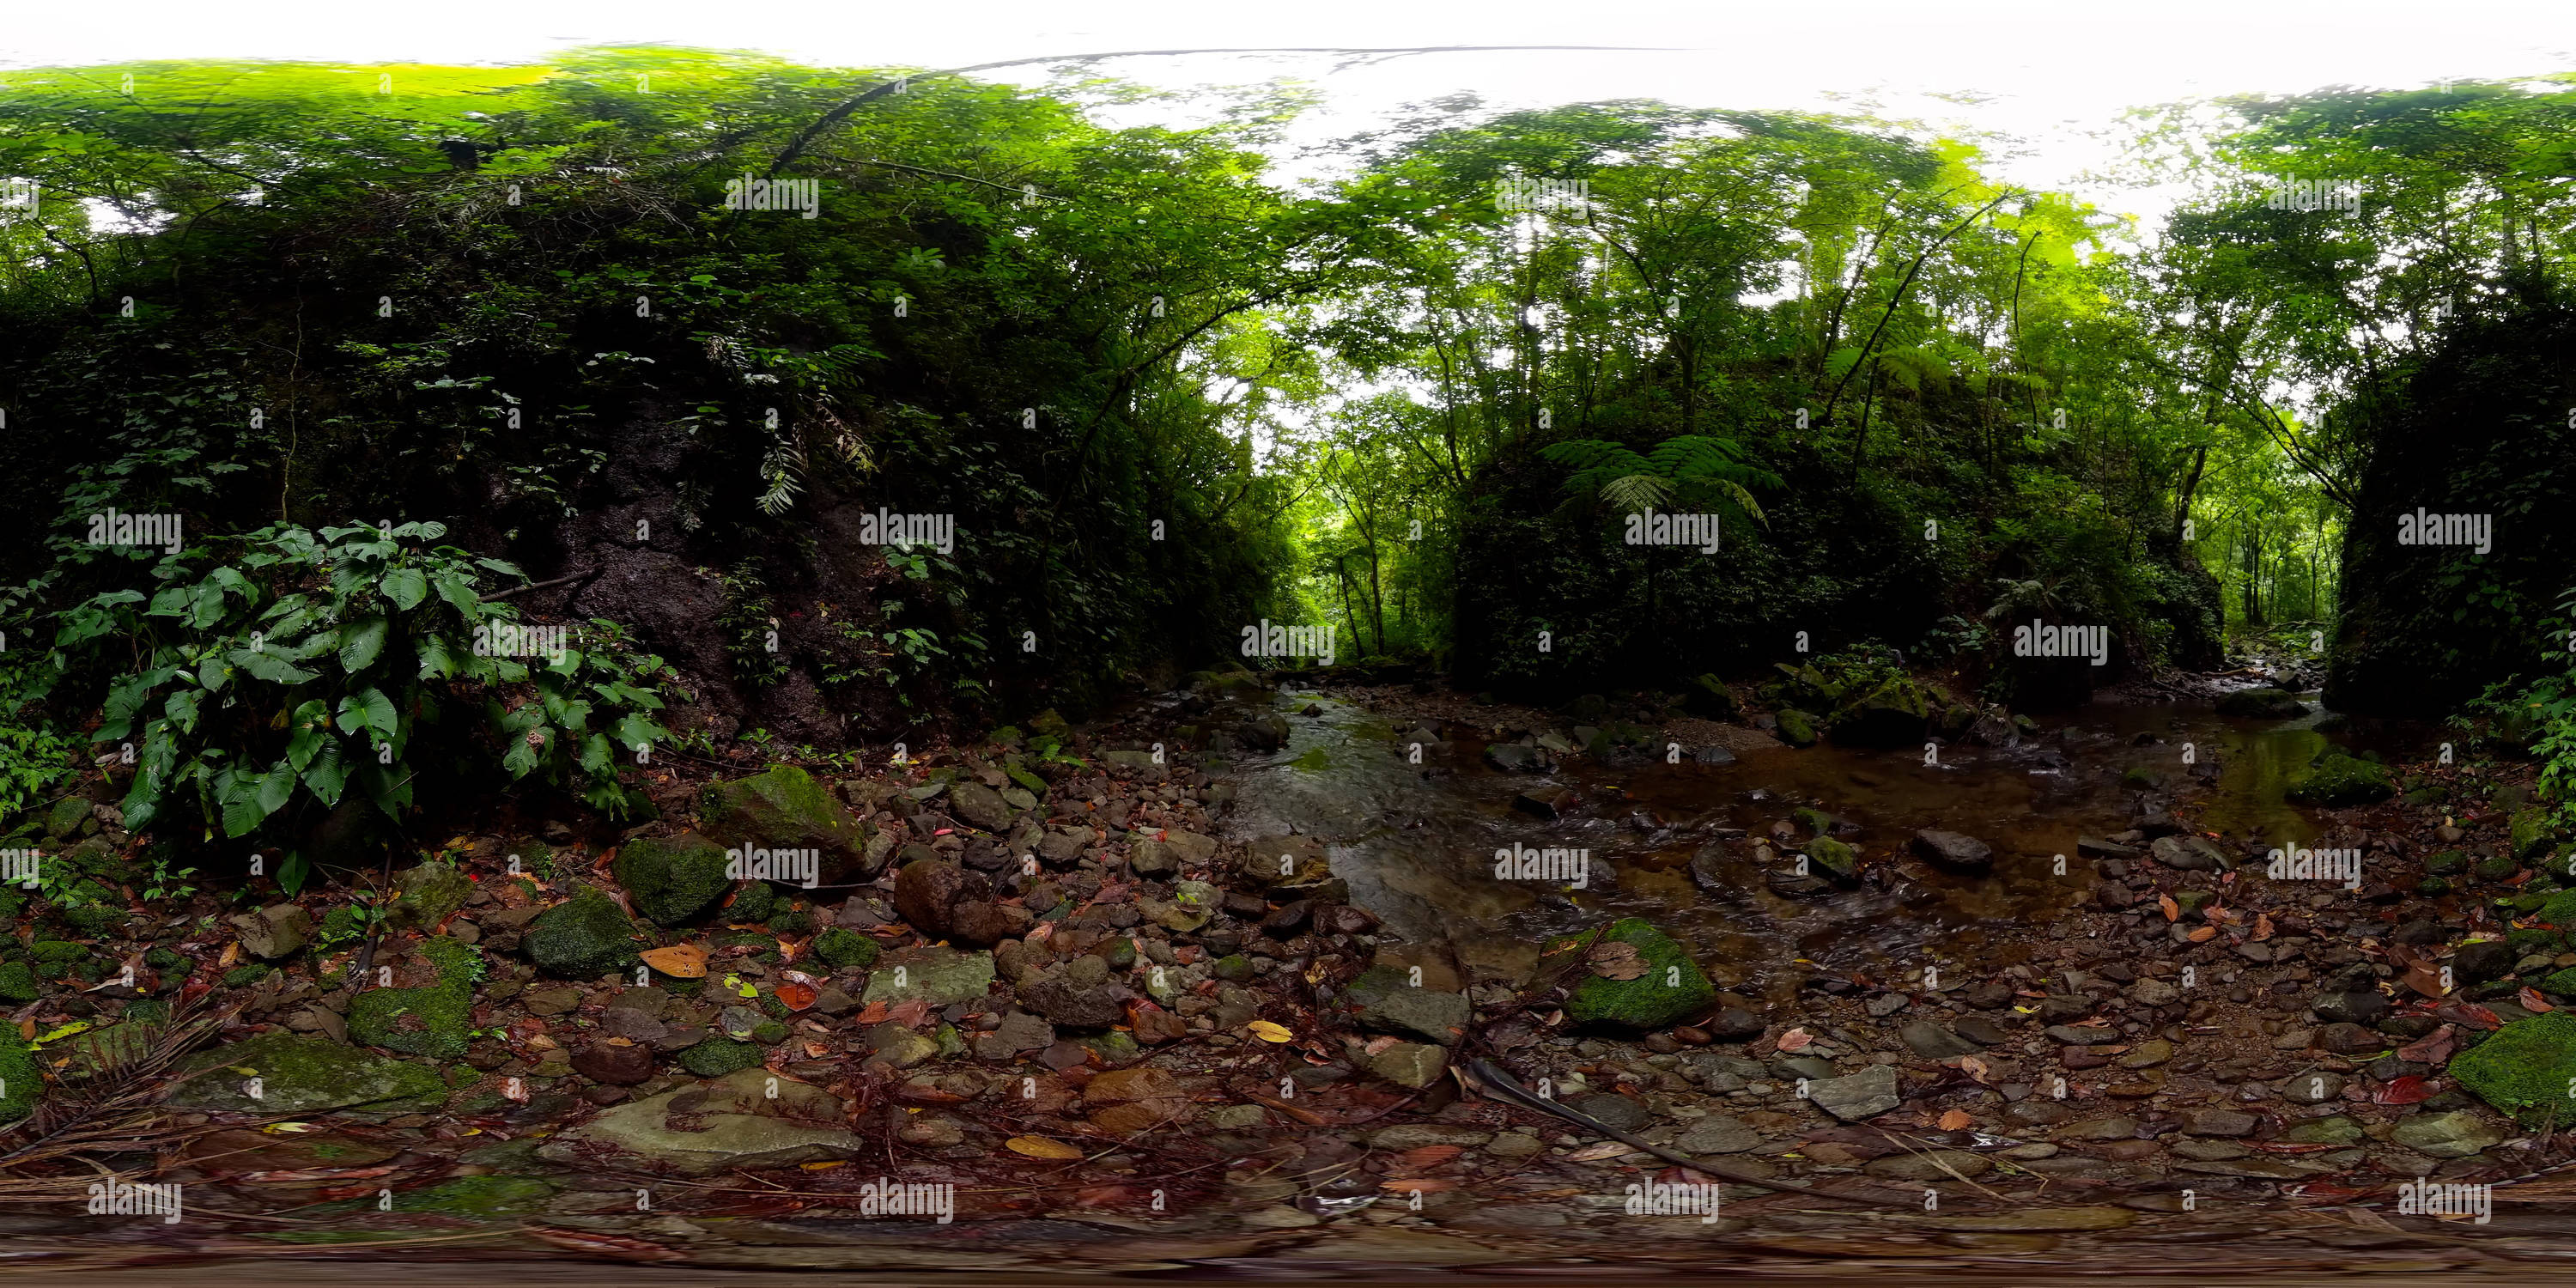 360 degree panoramic view of River in the rainforest in the mountains.